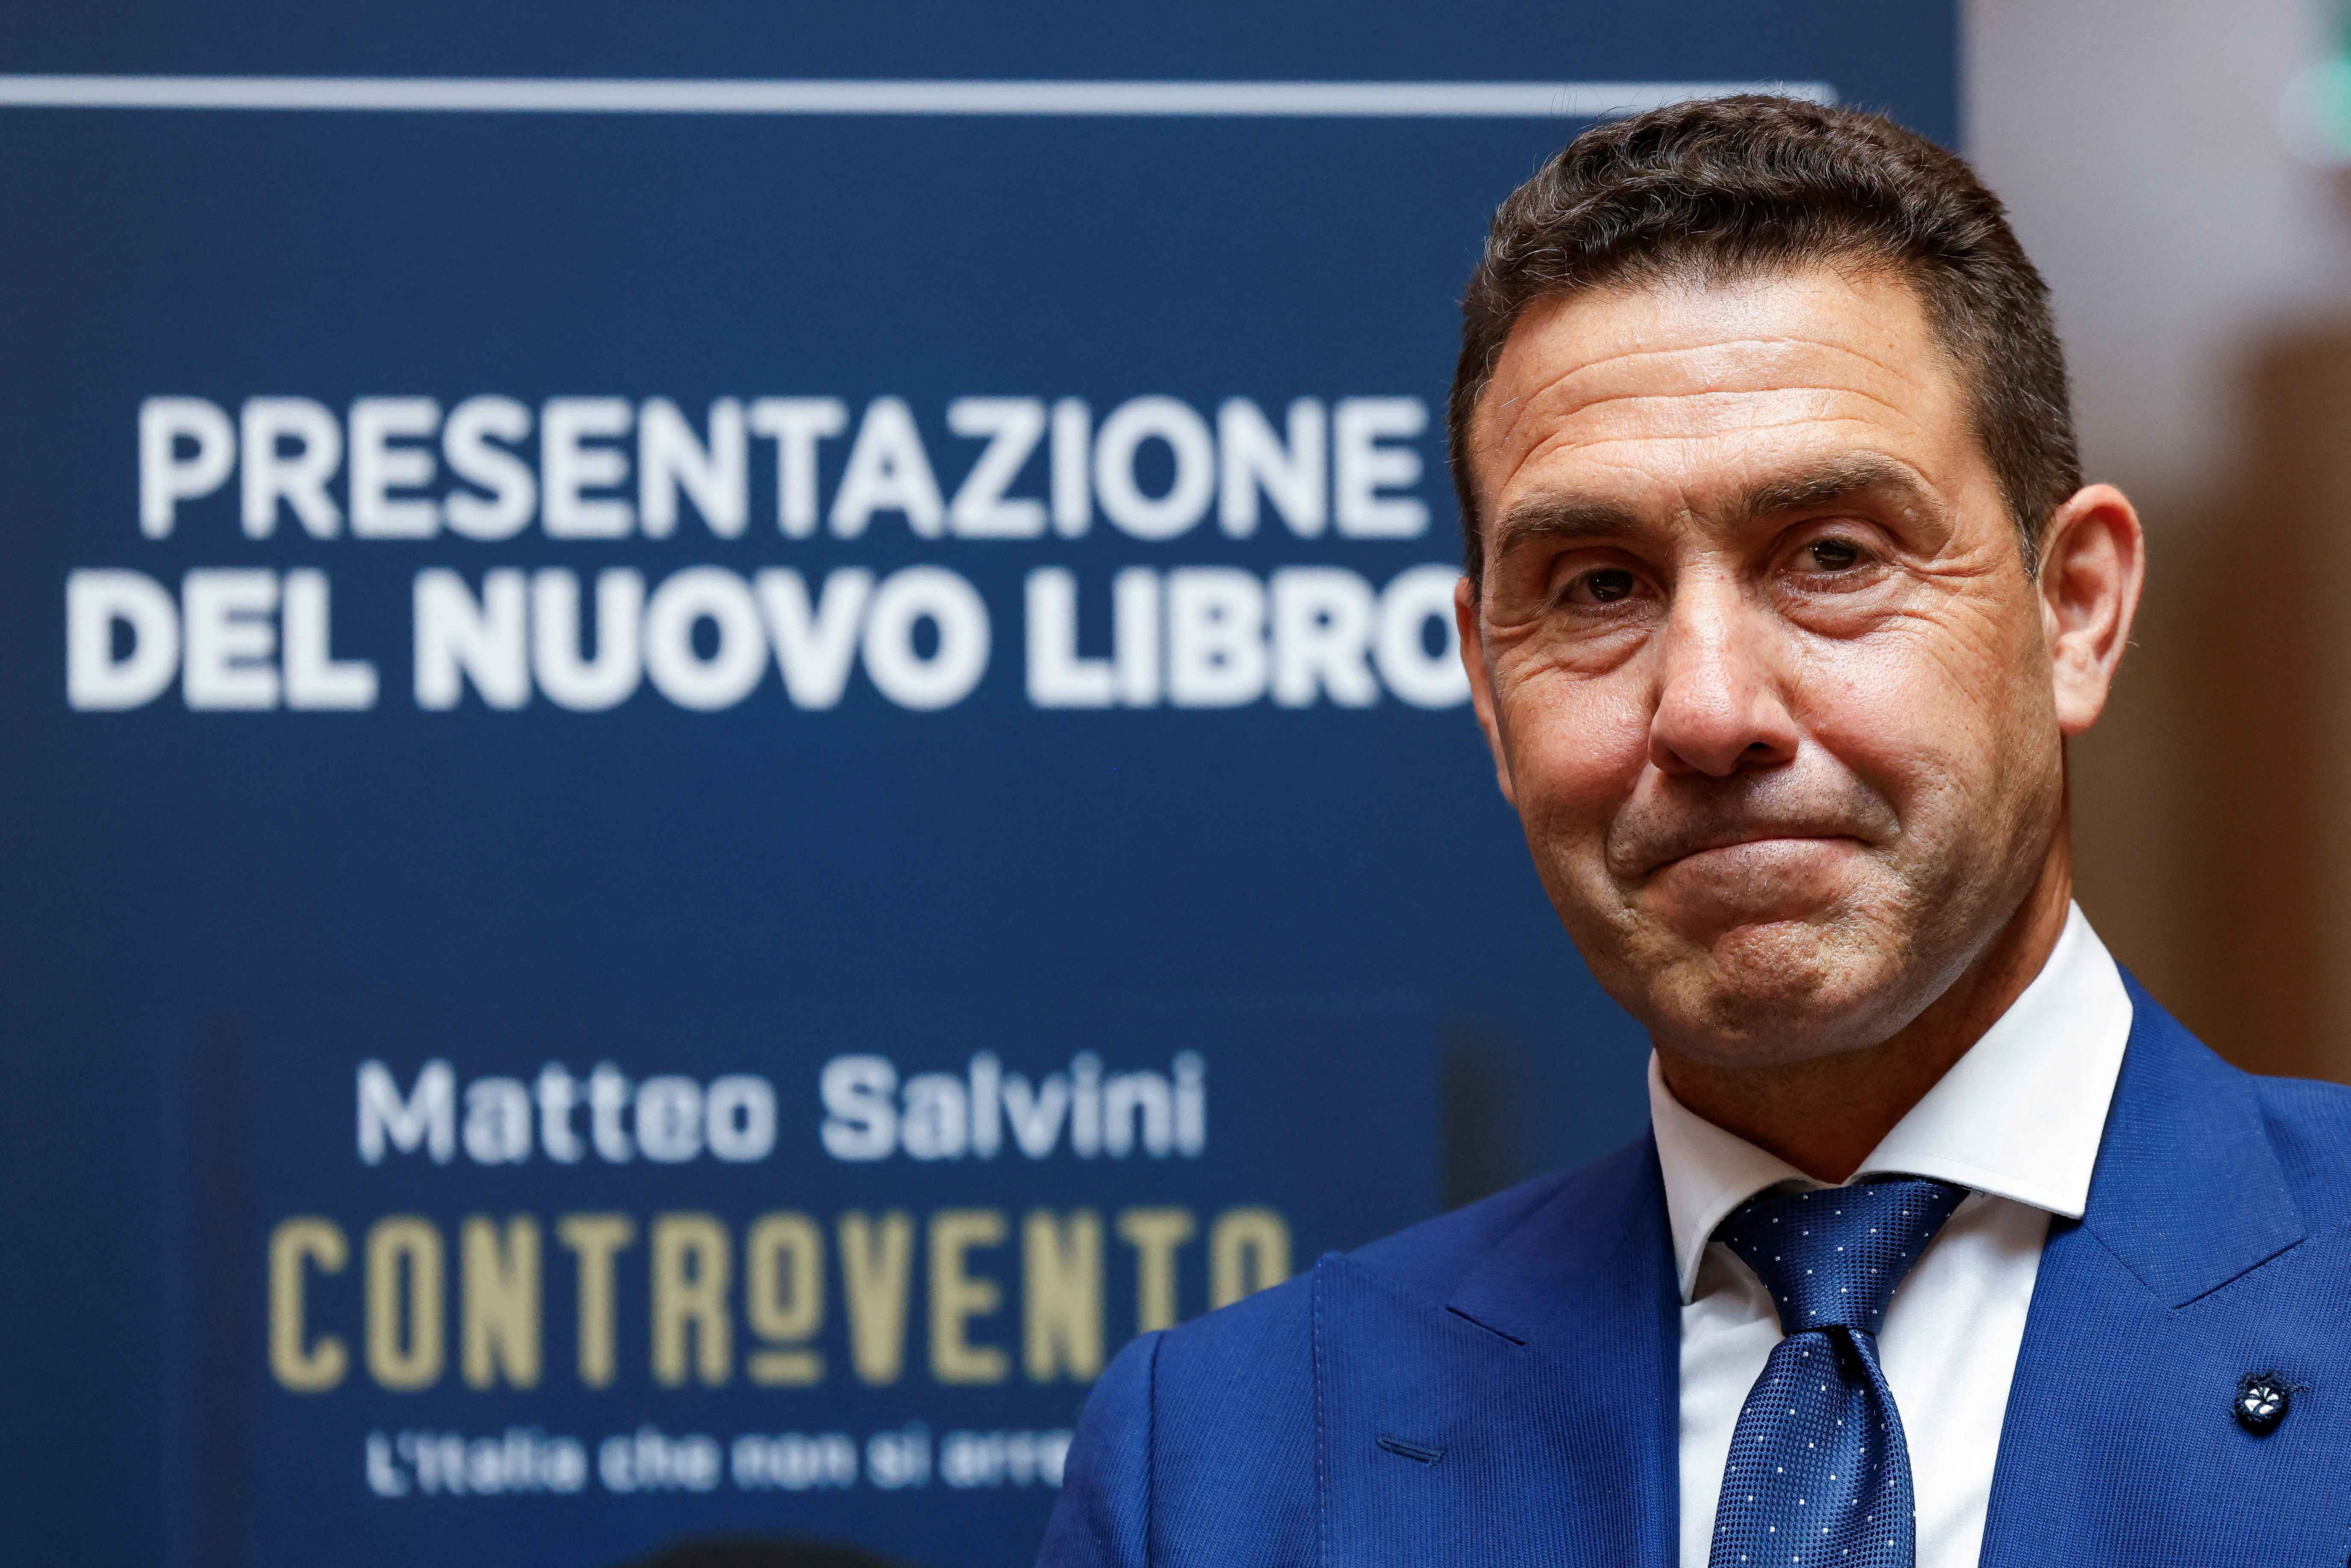 League party leader Matteo Salvini presents his latest book, in Rome